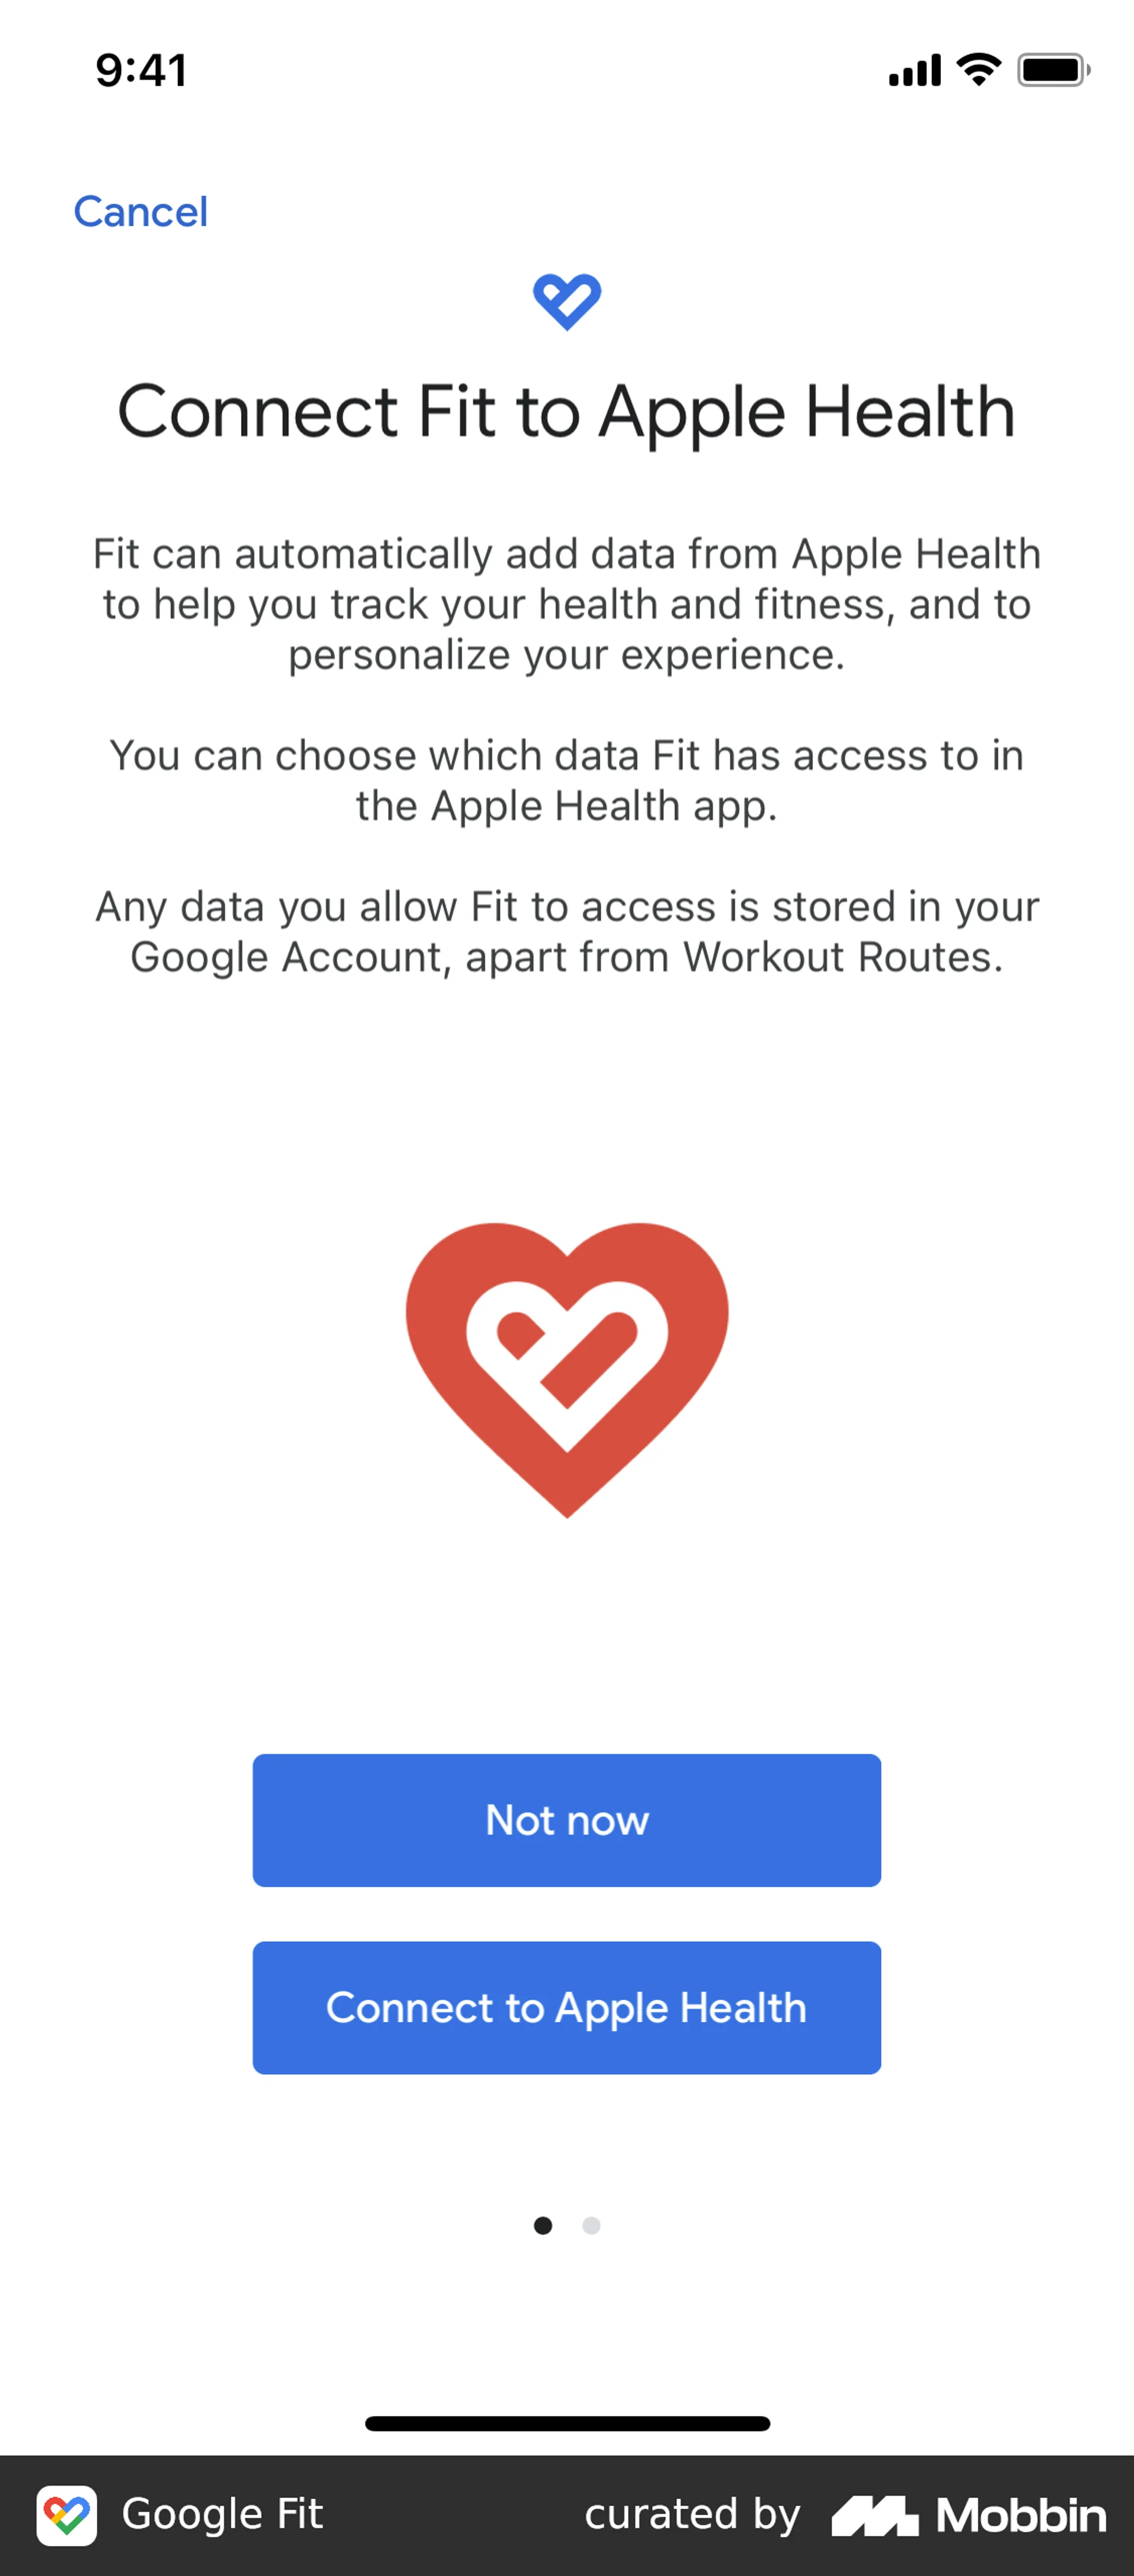 Connecting to Google Fit